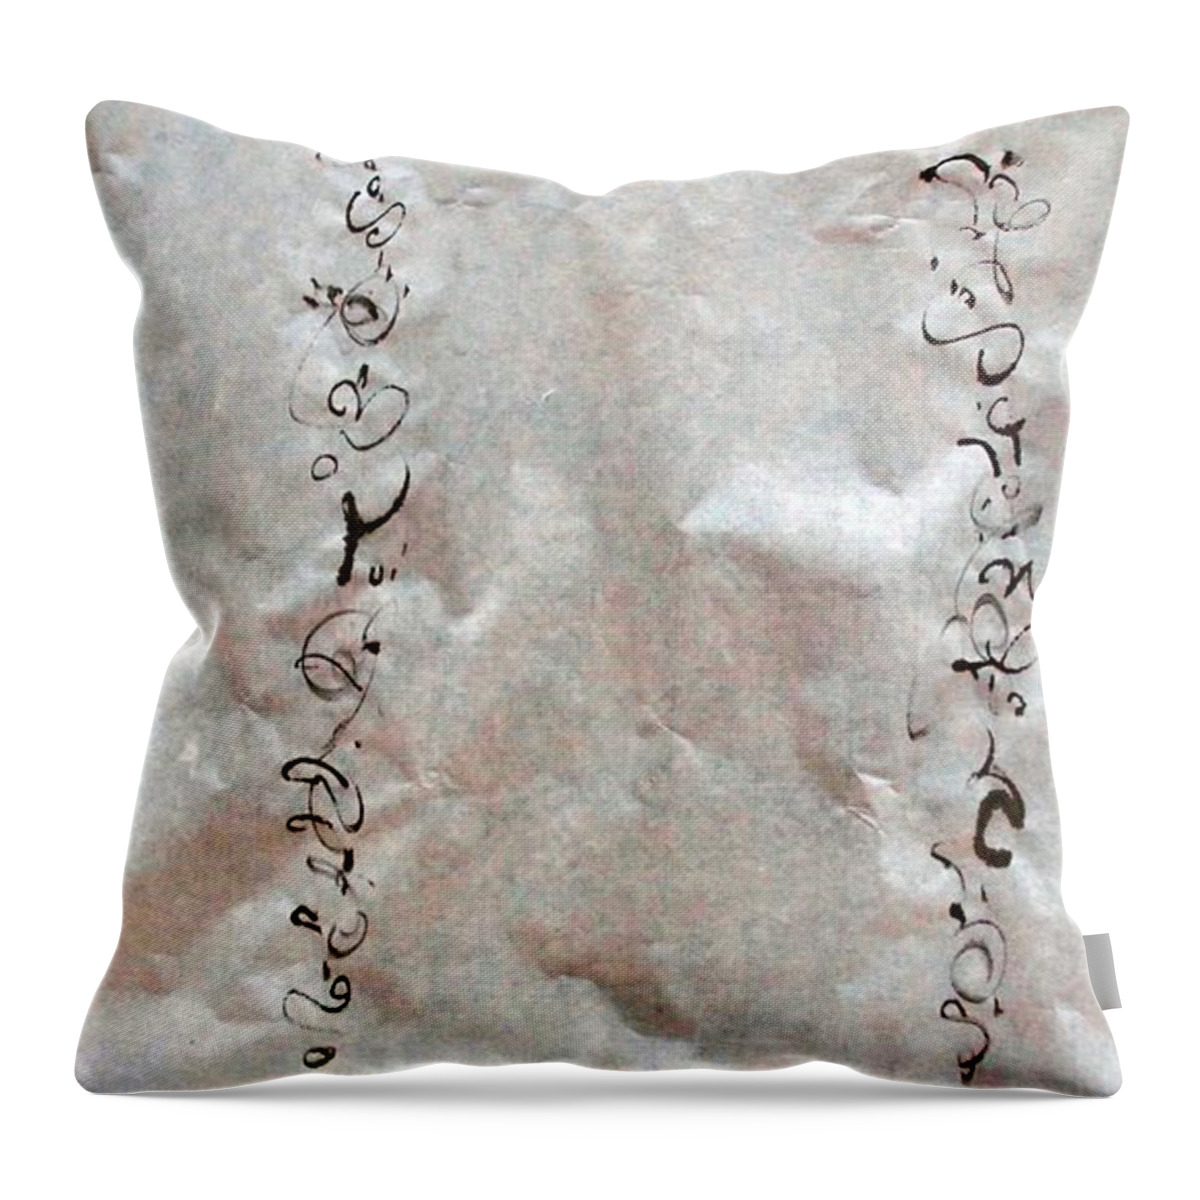 Imaginary Calligraphy On Paper Throw Pillow featuring the painting Four Illuminated by Nancy Kane Chapman